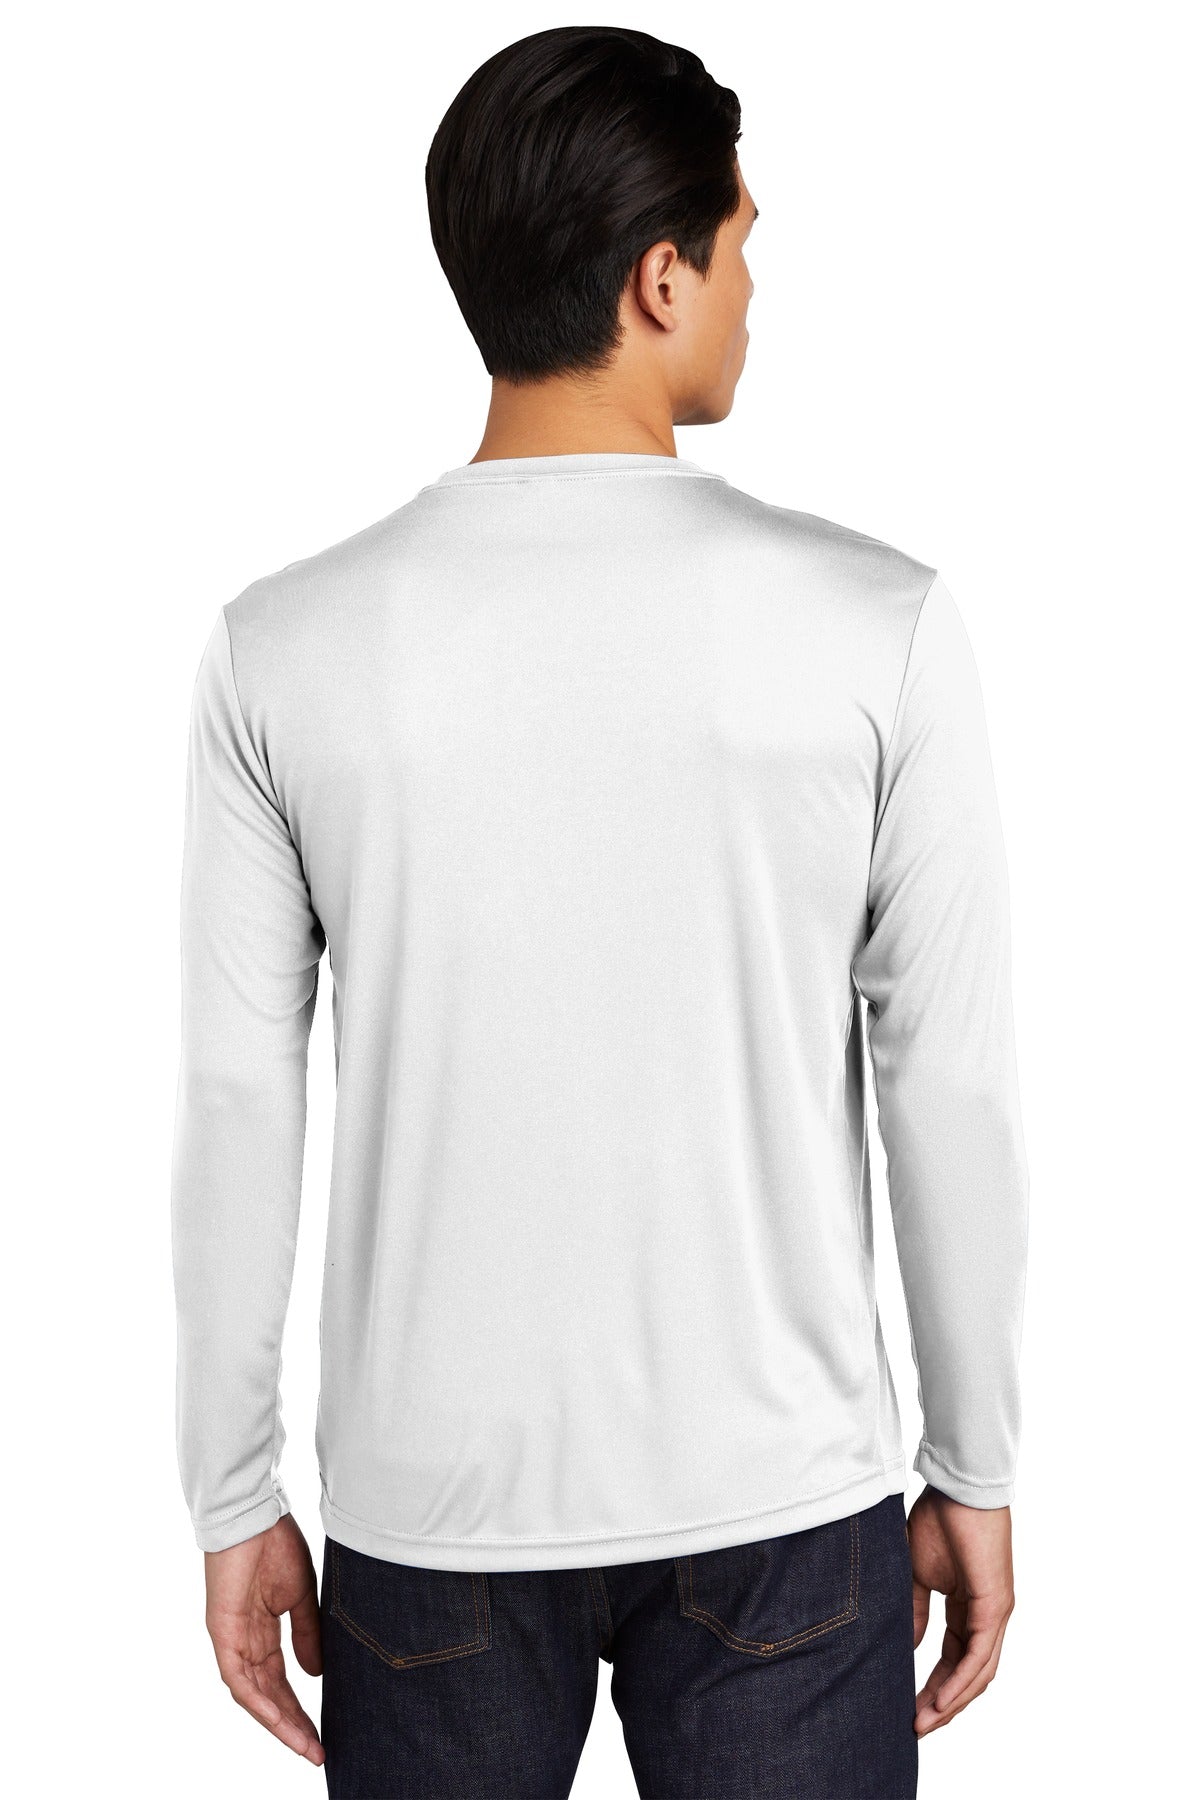 Sport-Tek® Long Sleeve PosiCharge® Competitor™ Tee. ST350LS [White] - DFW Impression